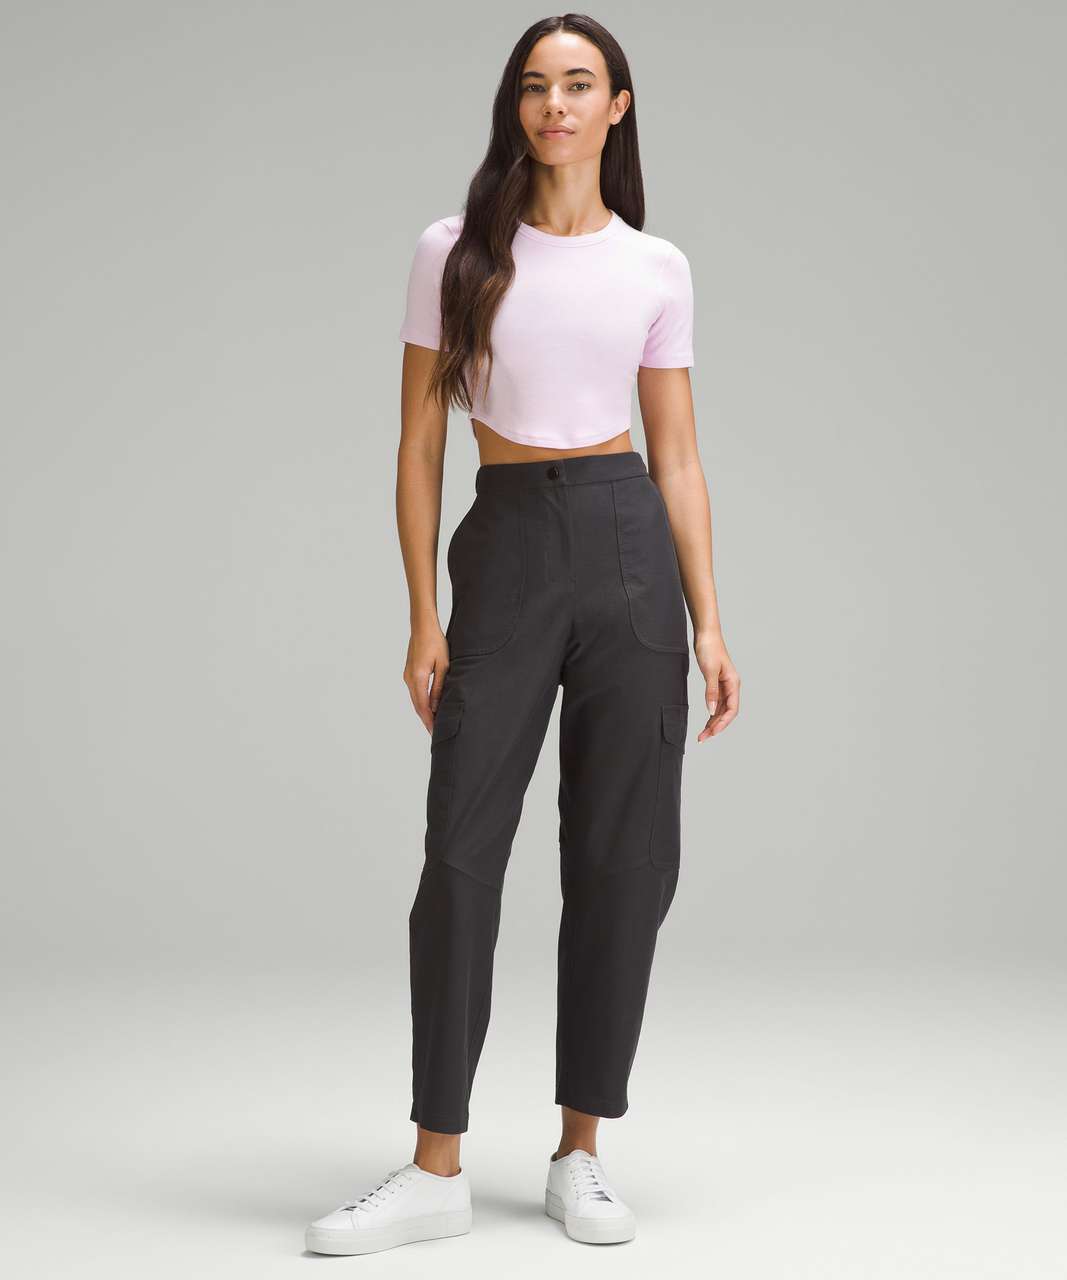 Lululemon Hold Tight Cropped T-Shirt - Meadowsweet Pink